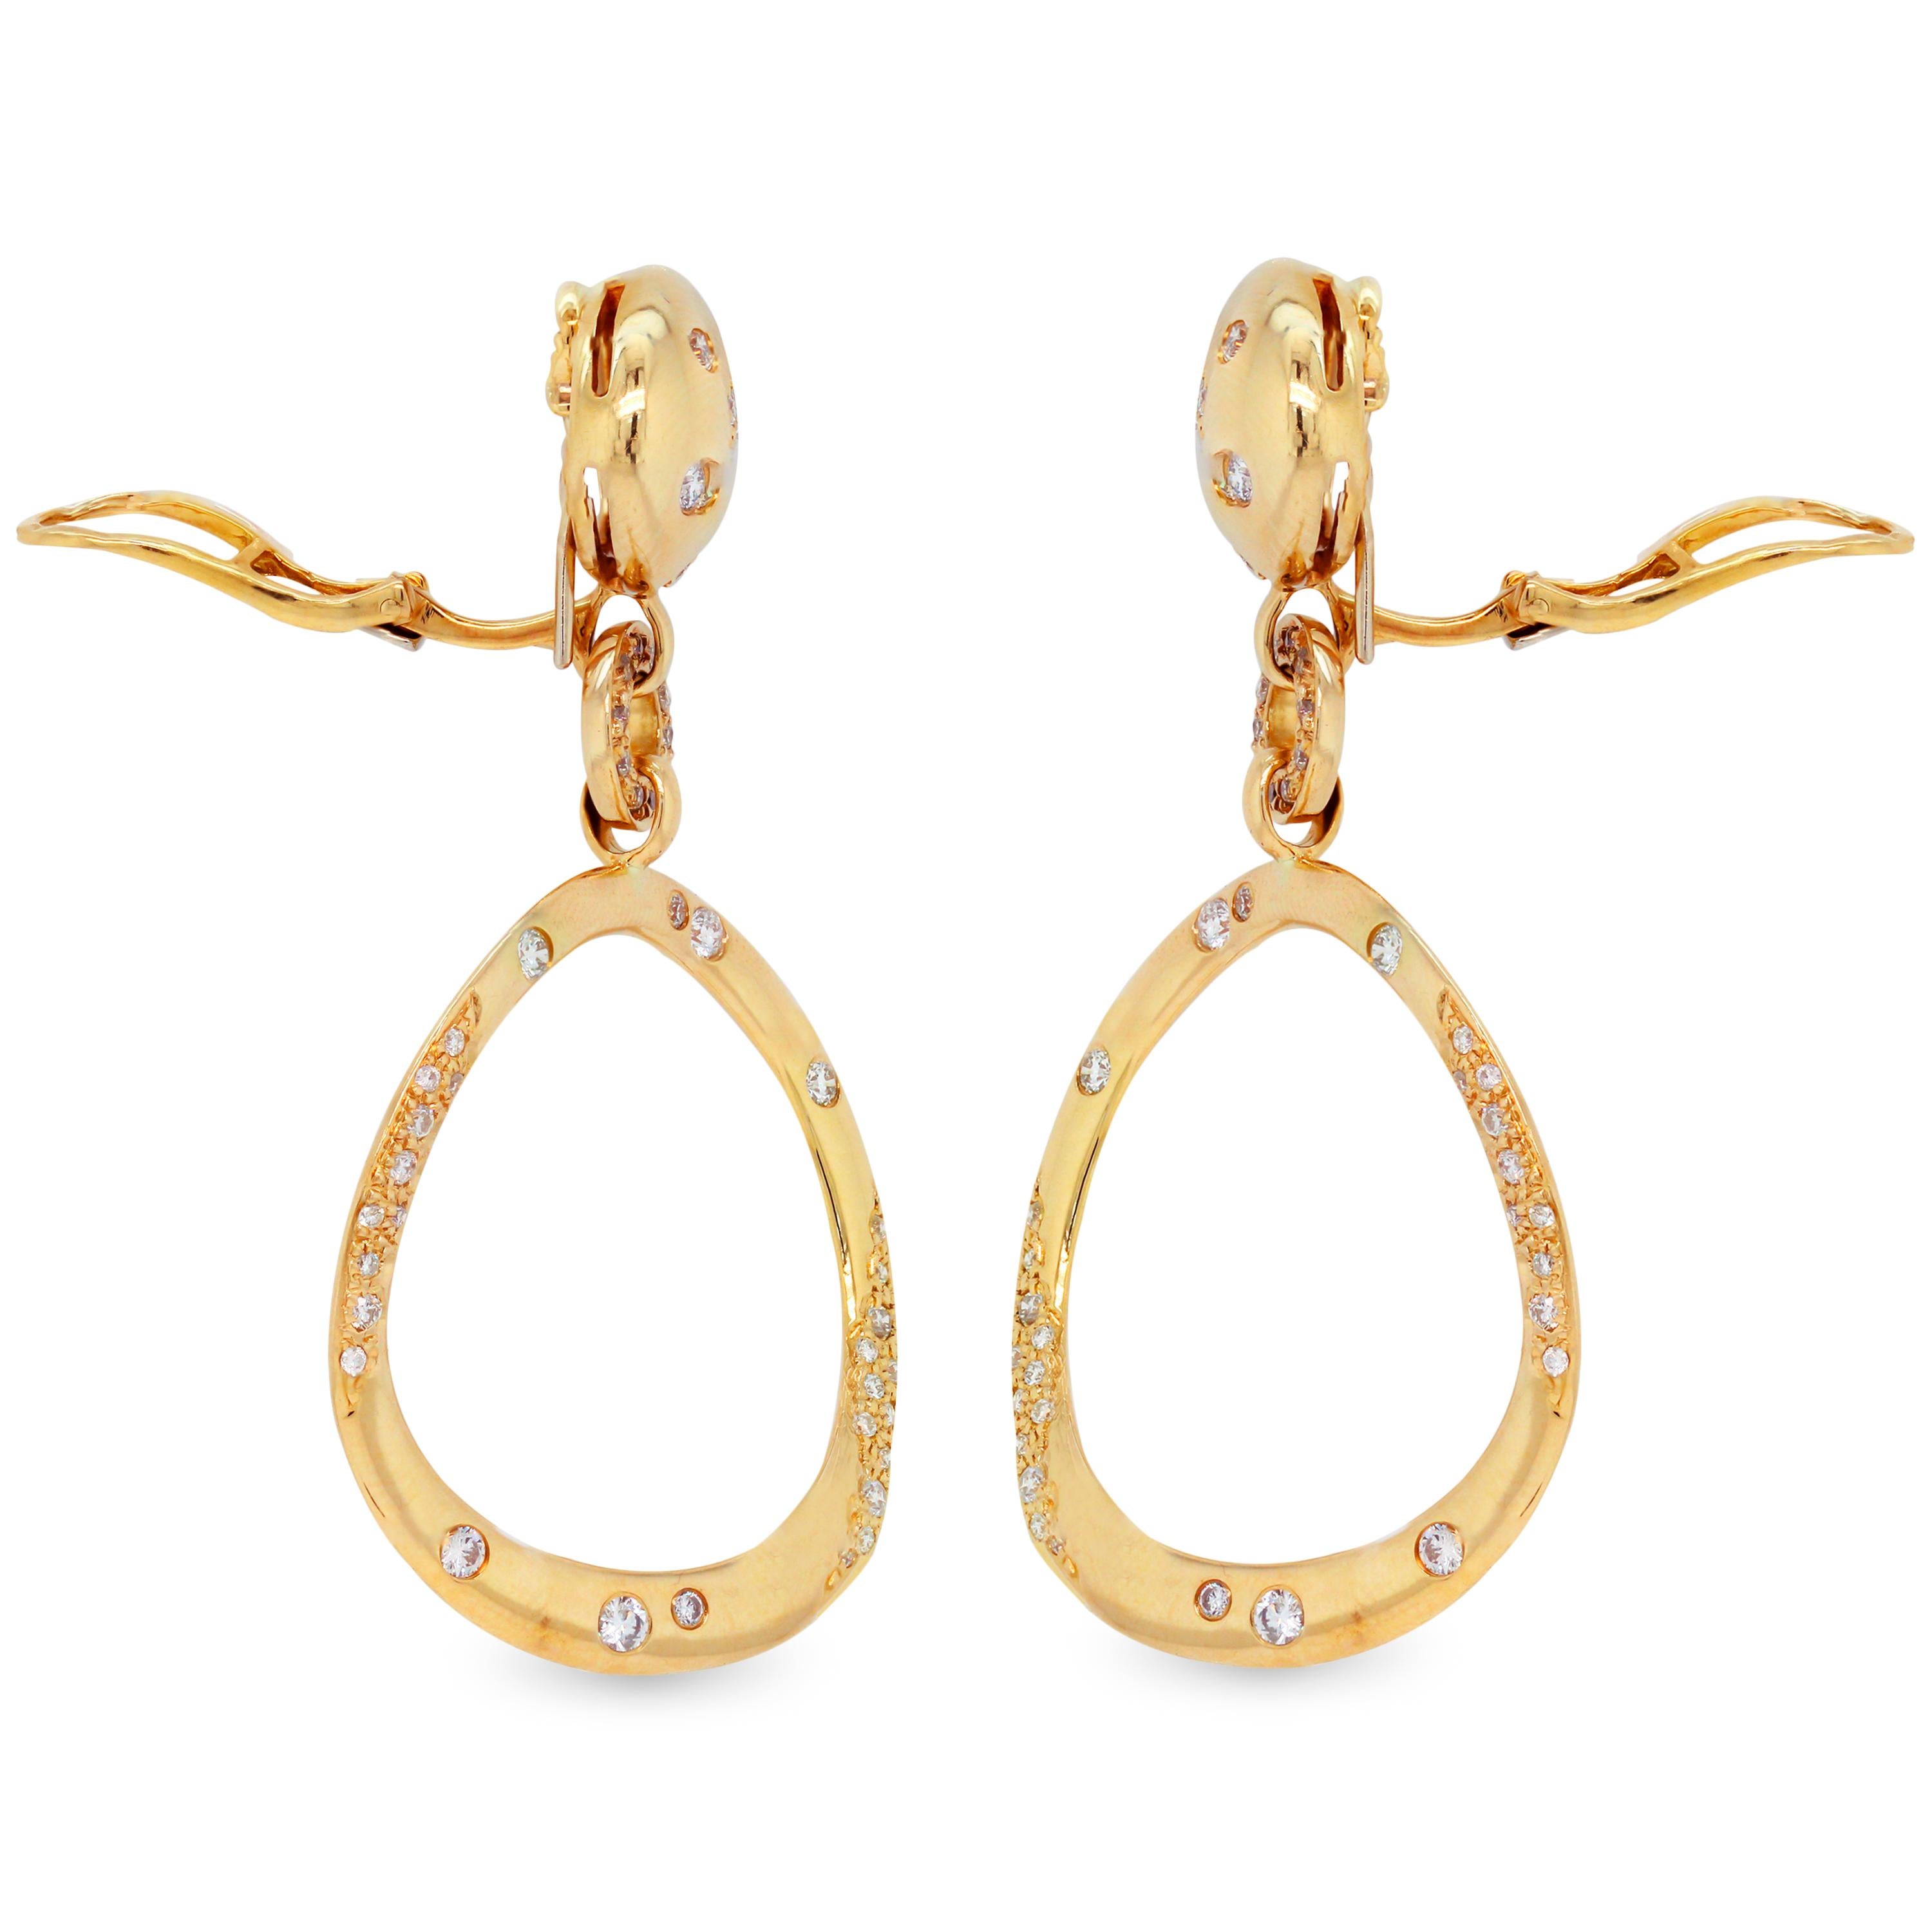 18K Yellow Gold and Diamond Round Drop Dangle Earrings

This beautiful pair of earrings features diamonds set all throughout with a circle drop.

2.50 carat G color, VS clarity diamonds total weight

Earring post moves and can be worn as pierced or